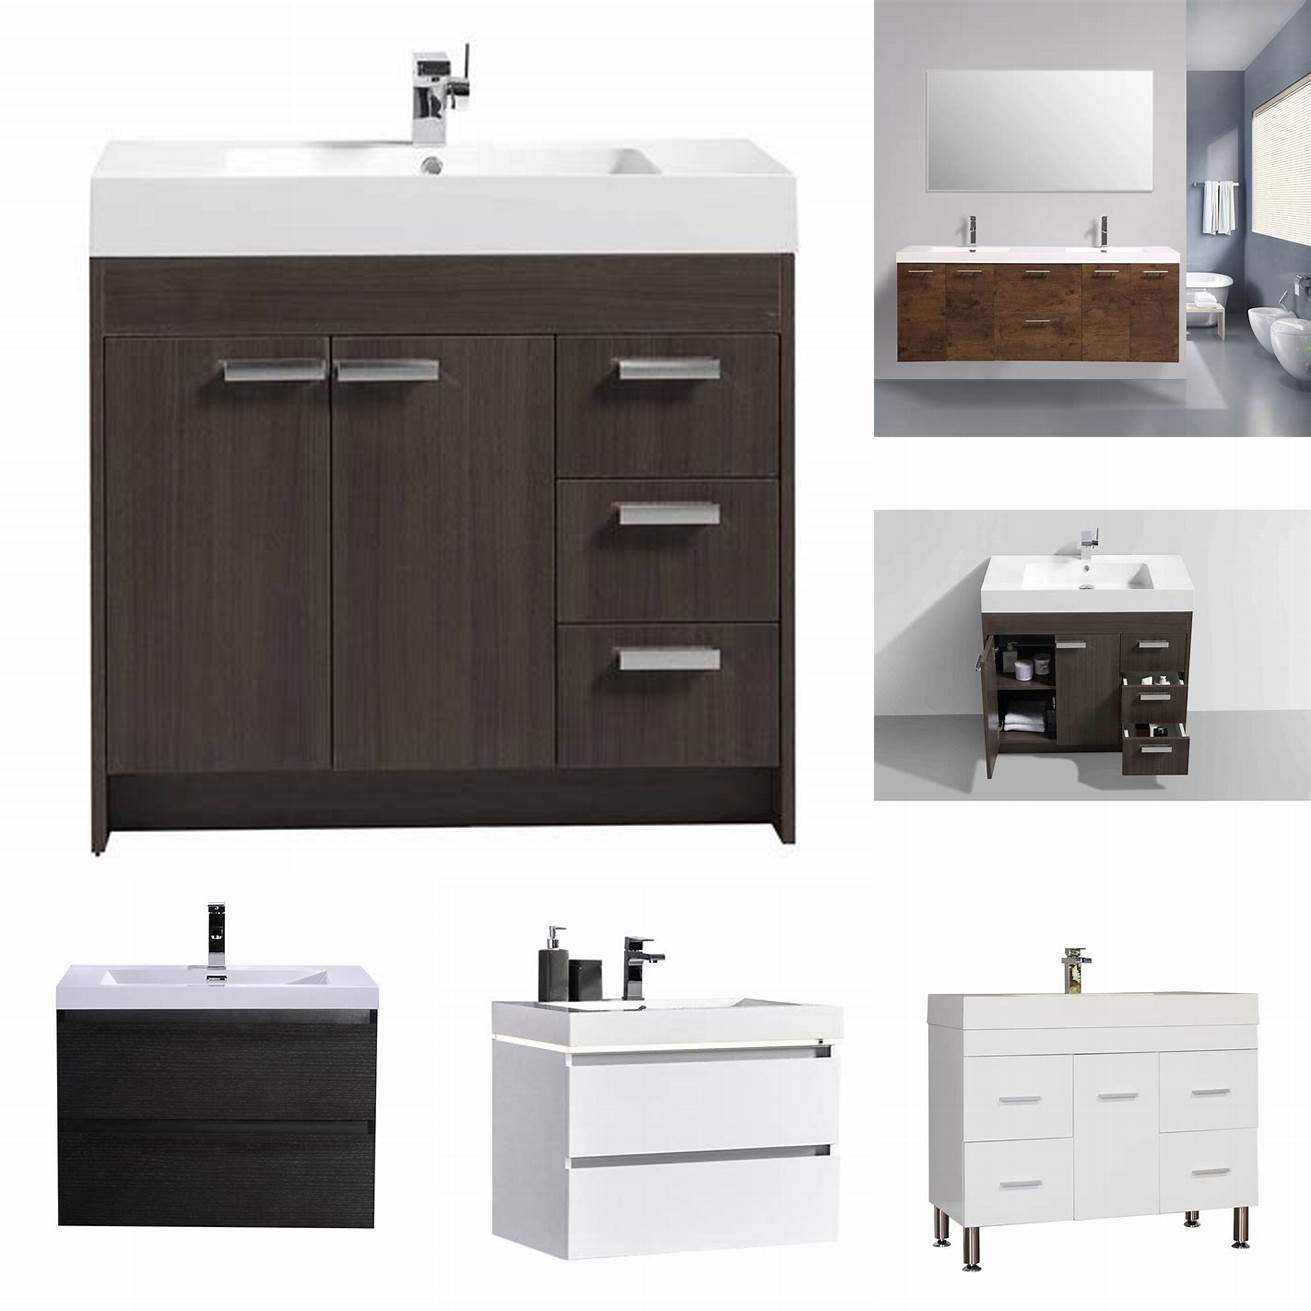 Acrylic Acrylic vanities are lightweight and easy to clean making them a popular choice for modern bathrooms